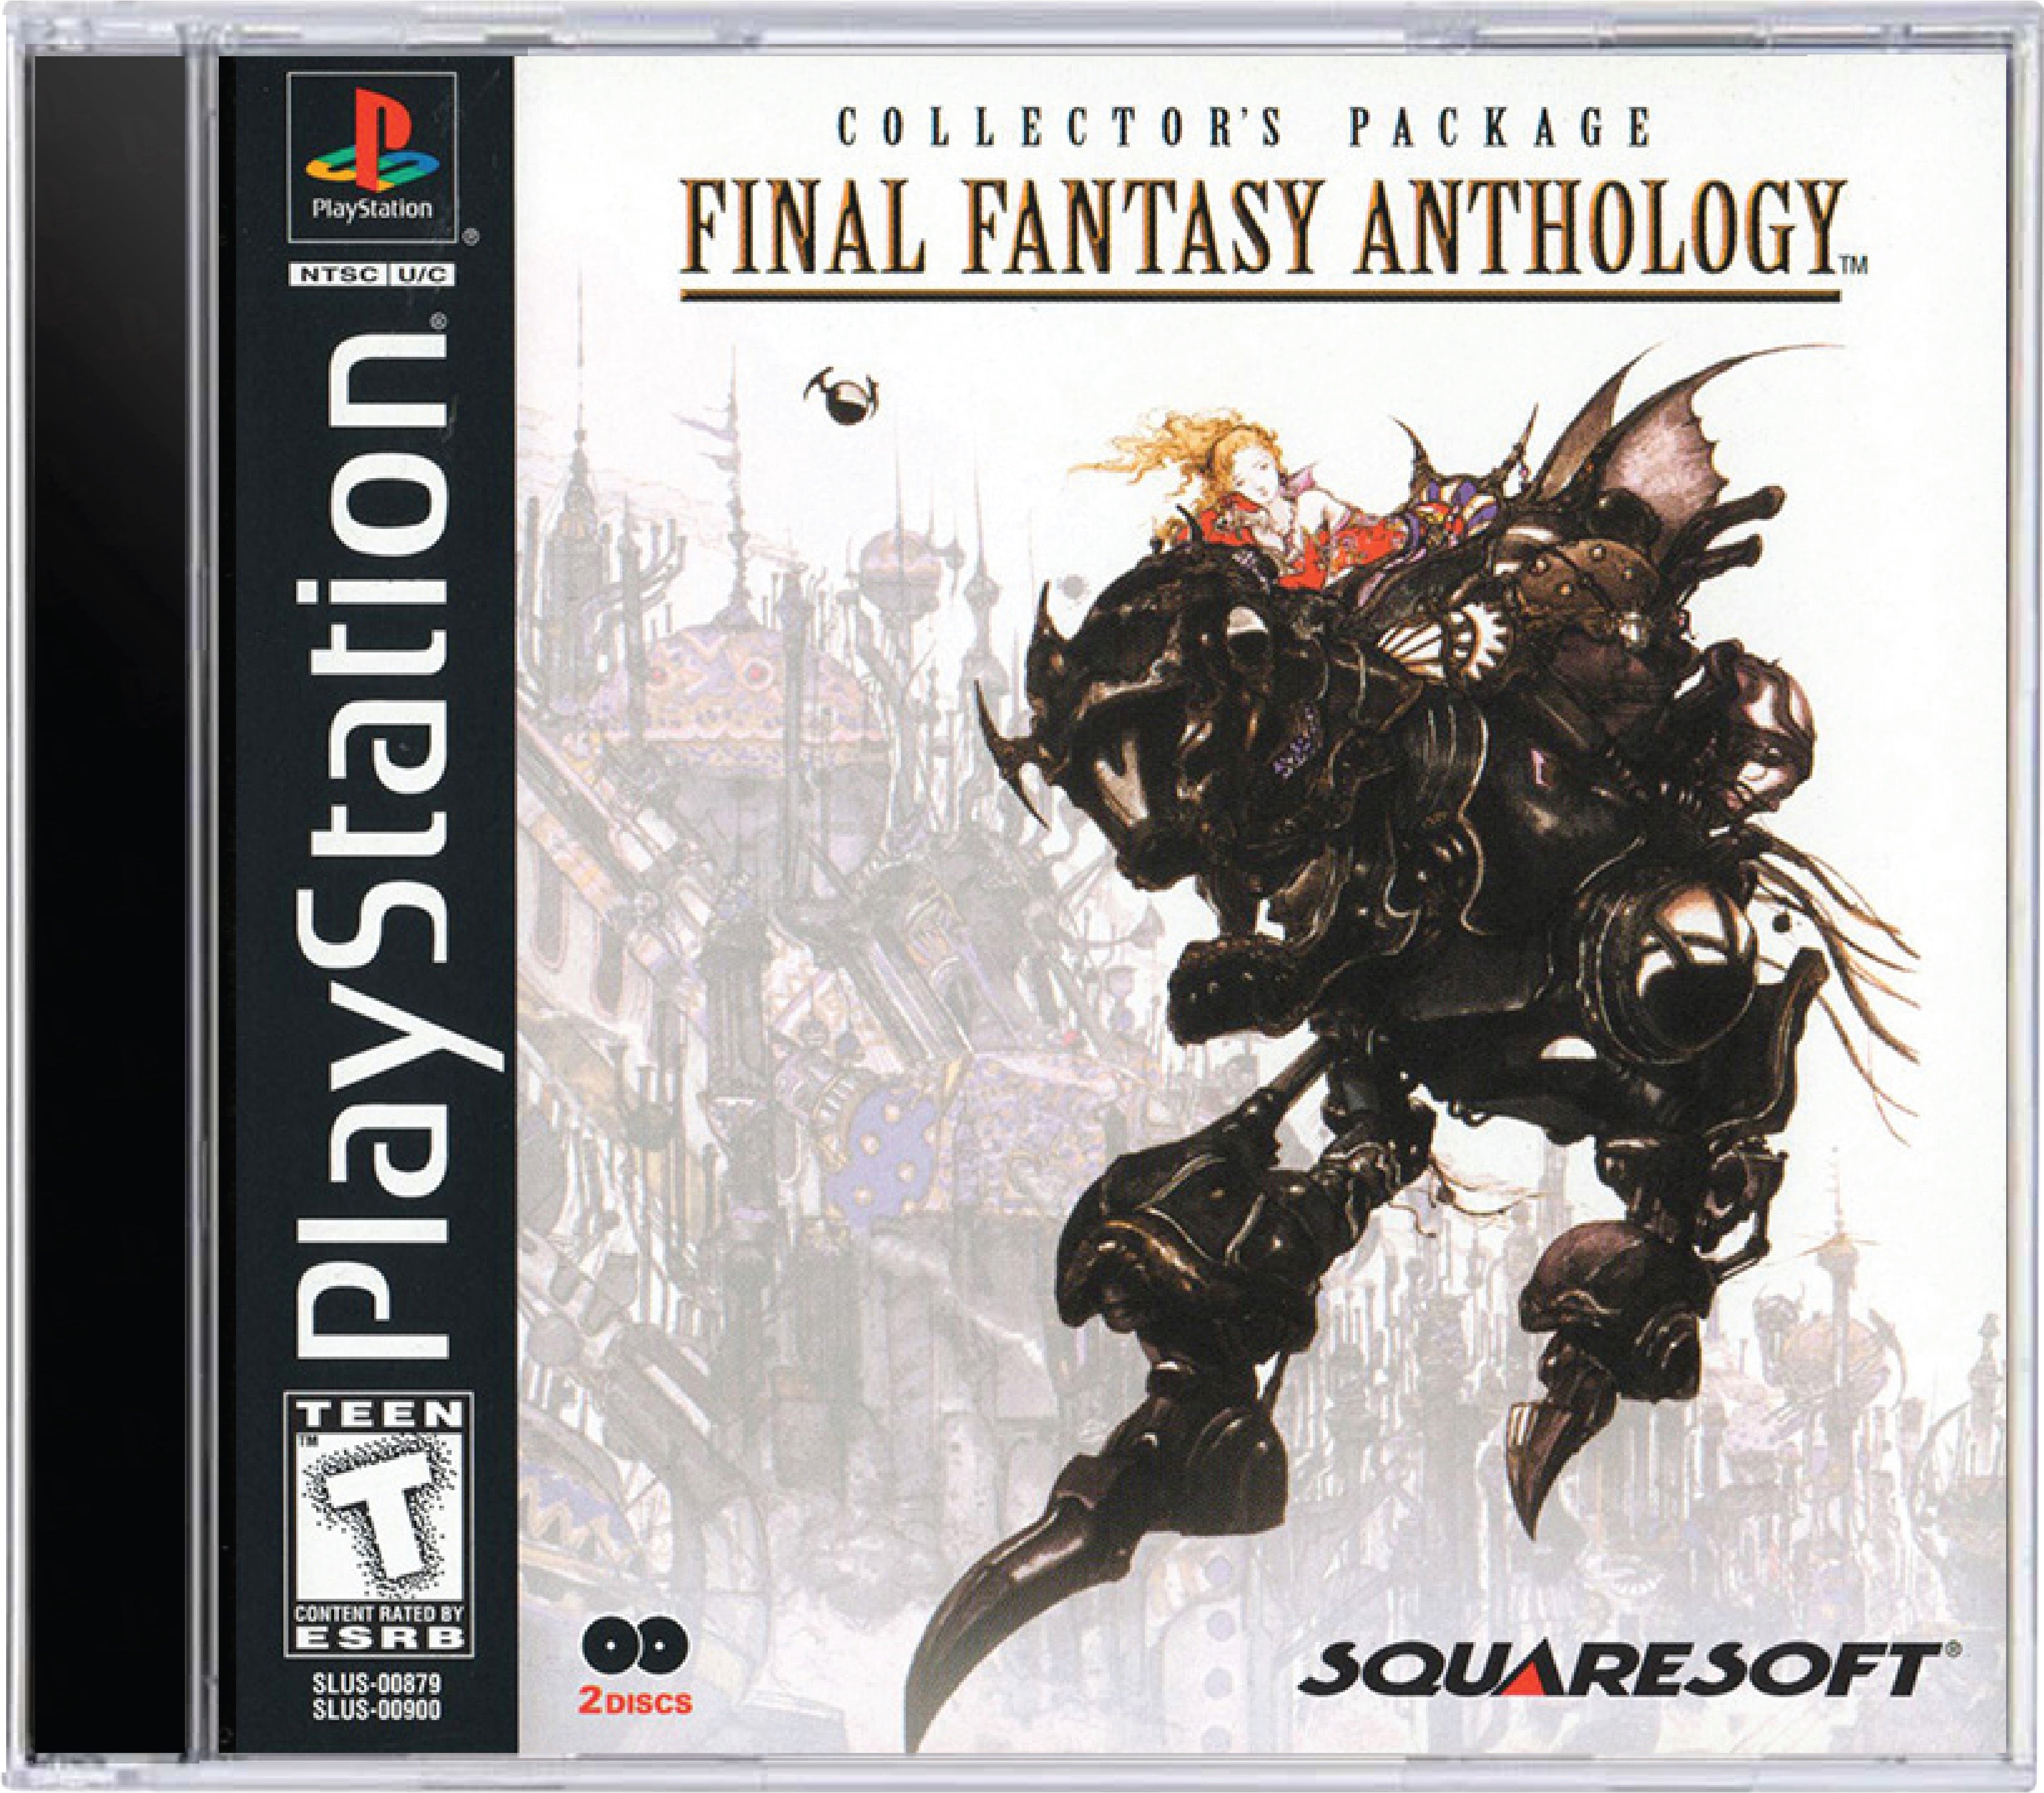 Final Fantasy Anthology Cover Art and Product Photo